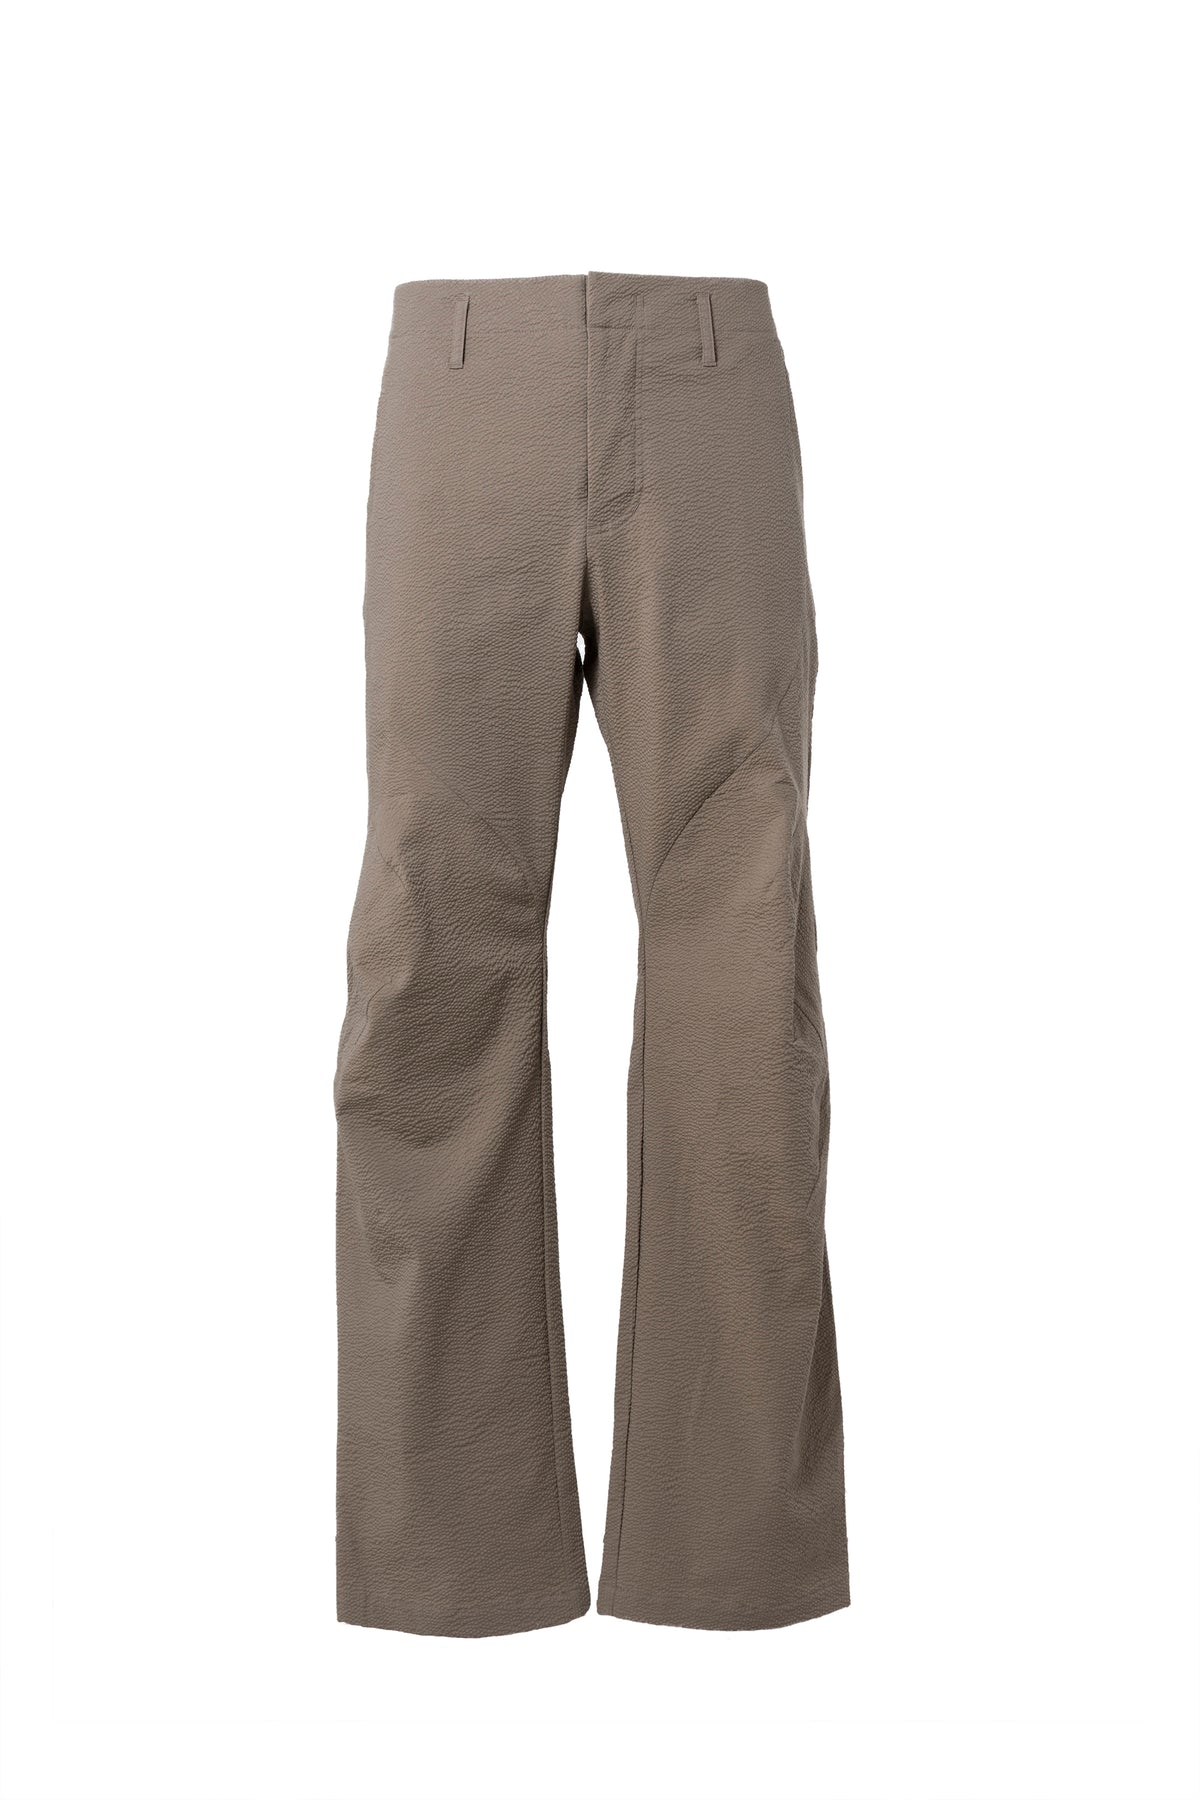 5.0+ TROUSERS RIGHT / BRN